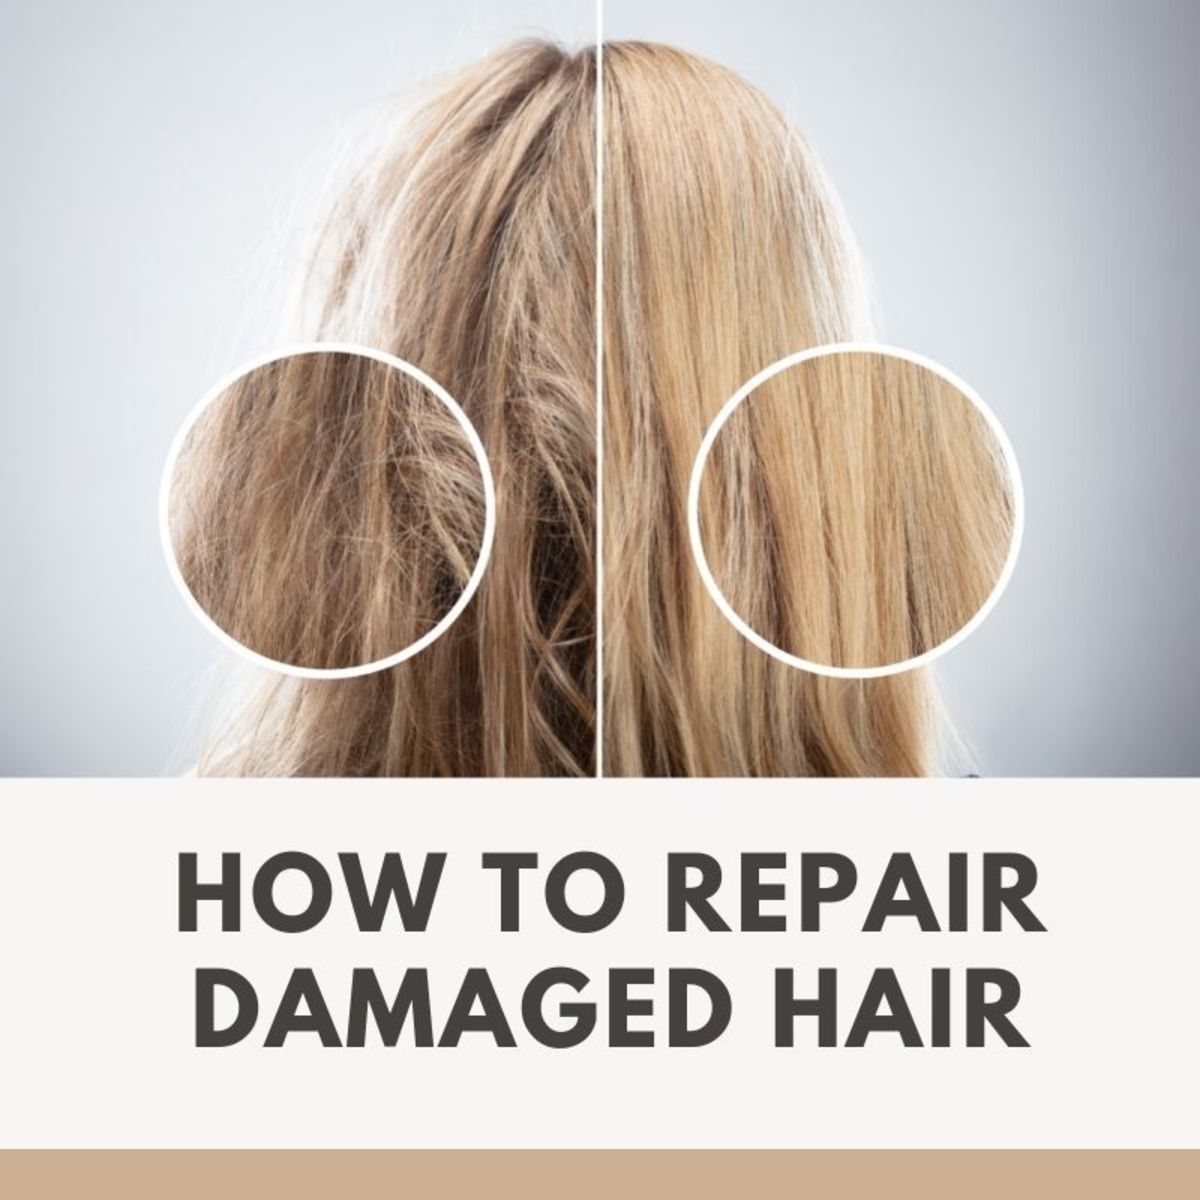 How to Repair Damaged Hair Properly